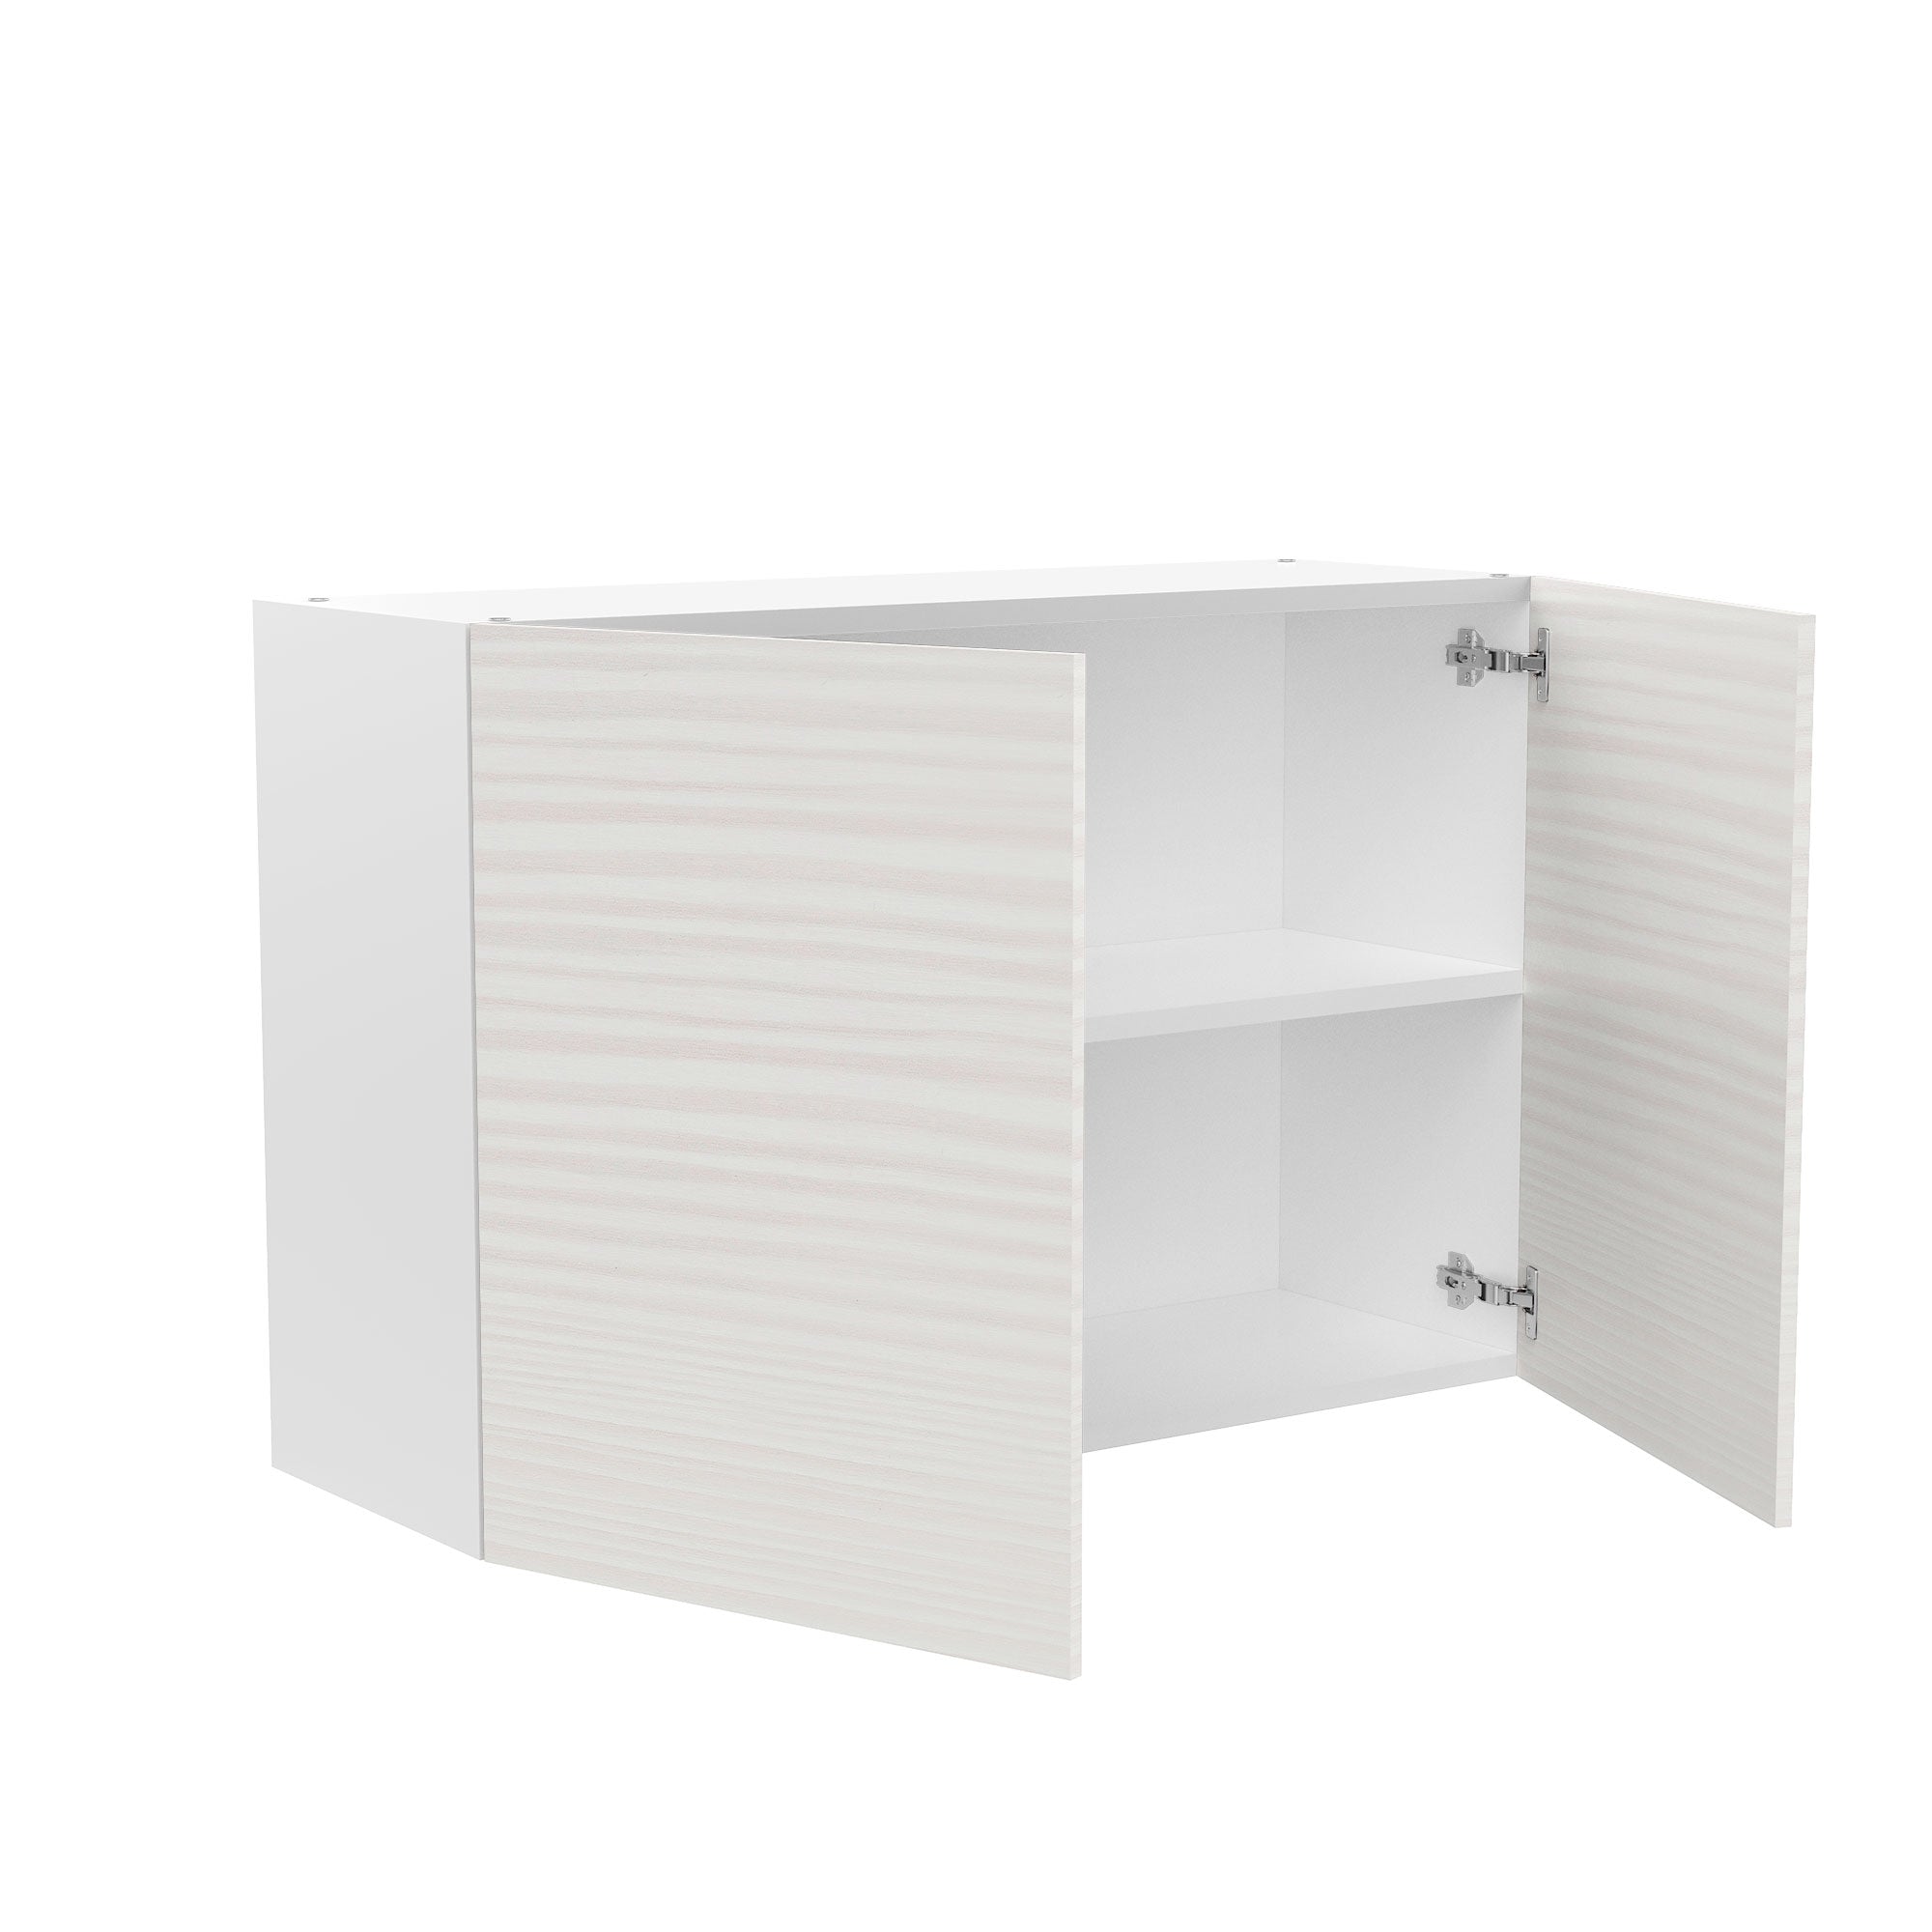 RTA - Pale Pine - Double Door Wall Cabinets | 36"W x 24"H x 12"D